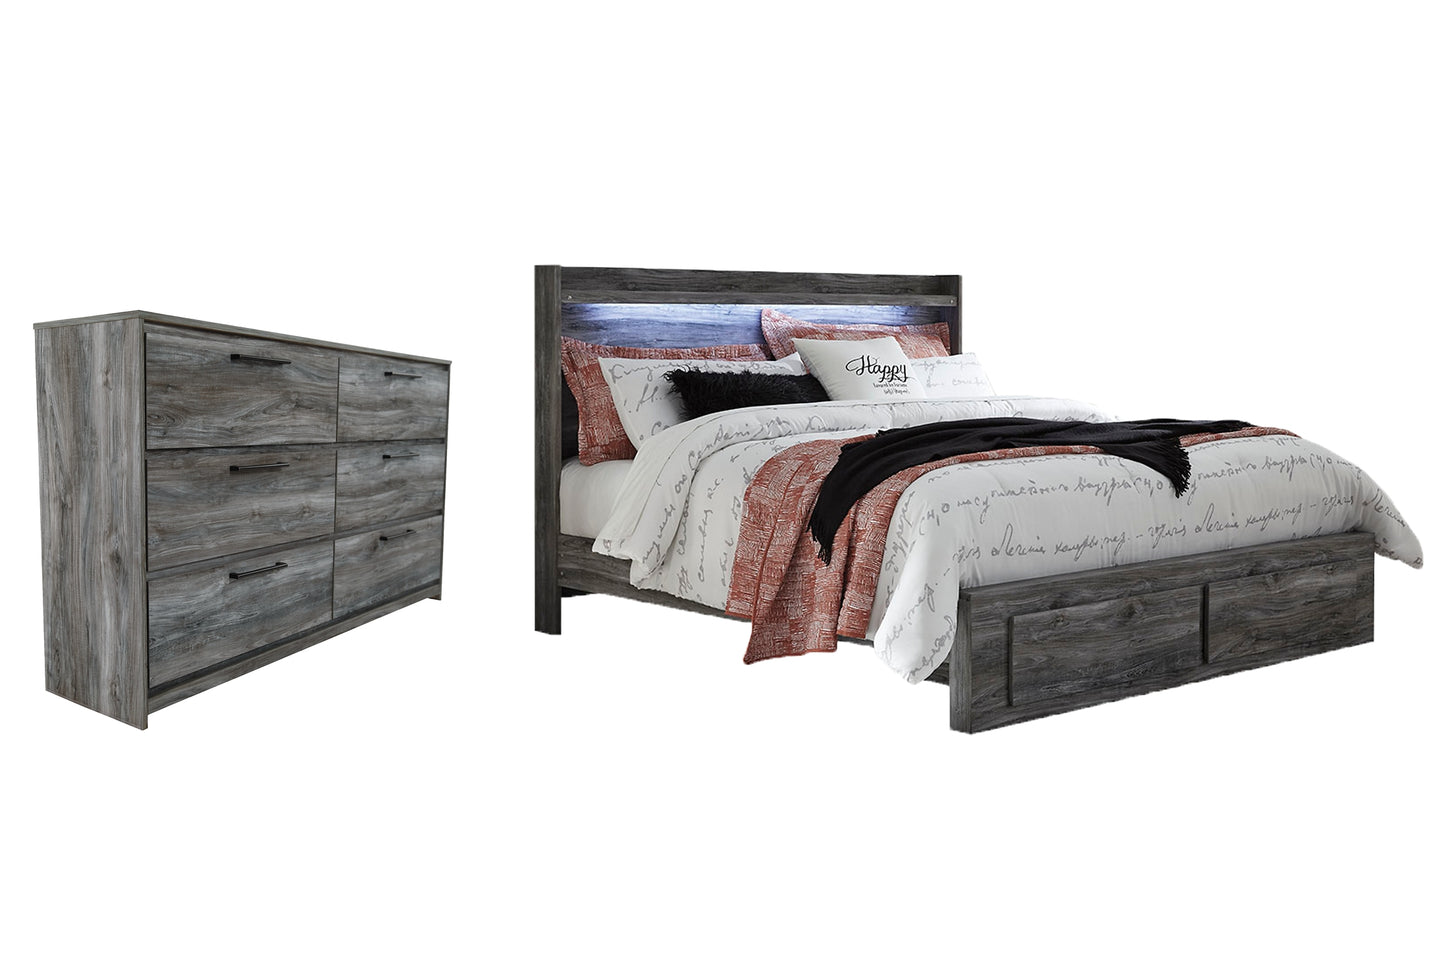 Baystorm King Panel Bed with 2 Storage Drawers with Dresser JB's Furniture  Home Furniture, Home Decor, Furniture Store